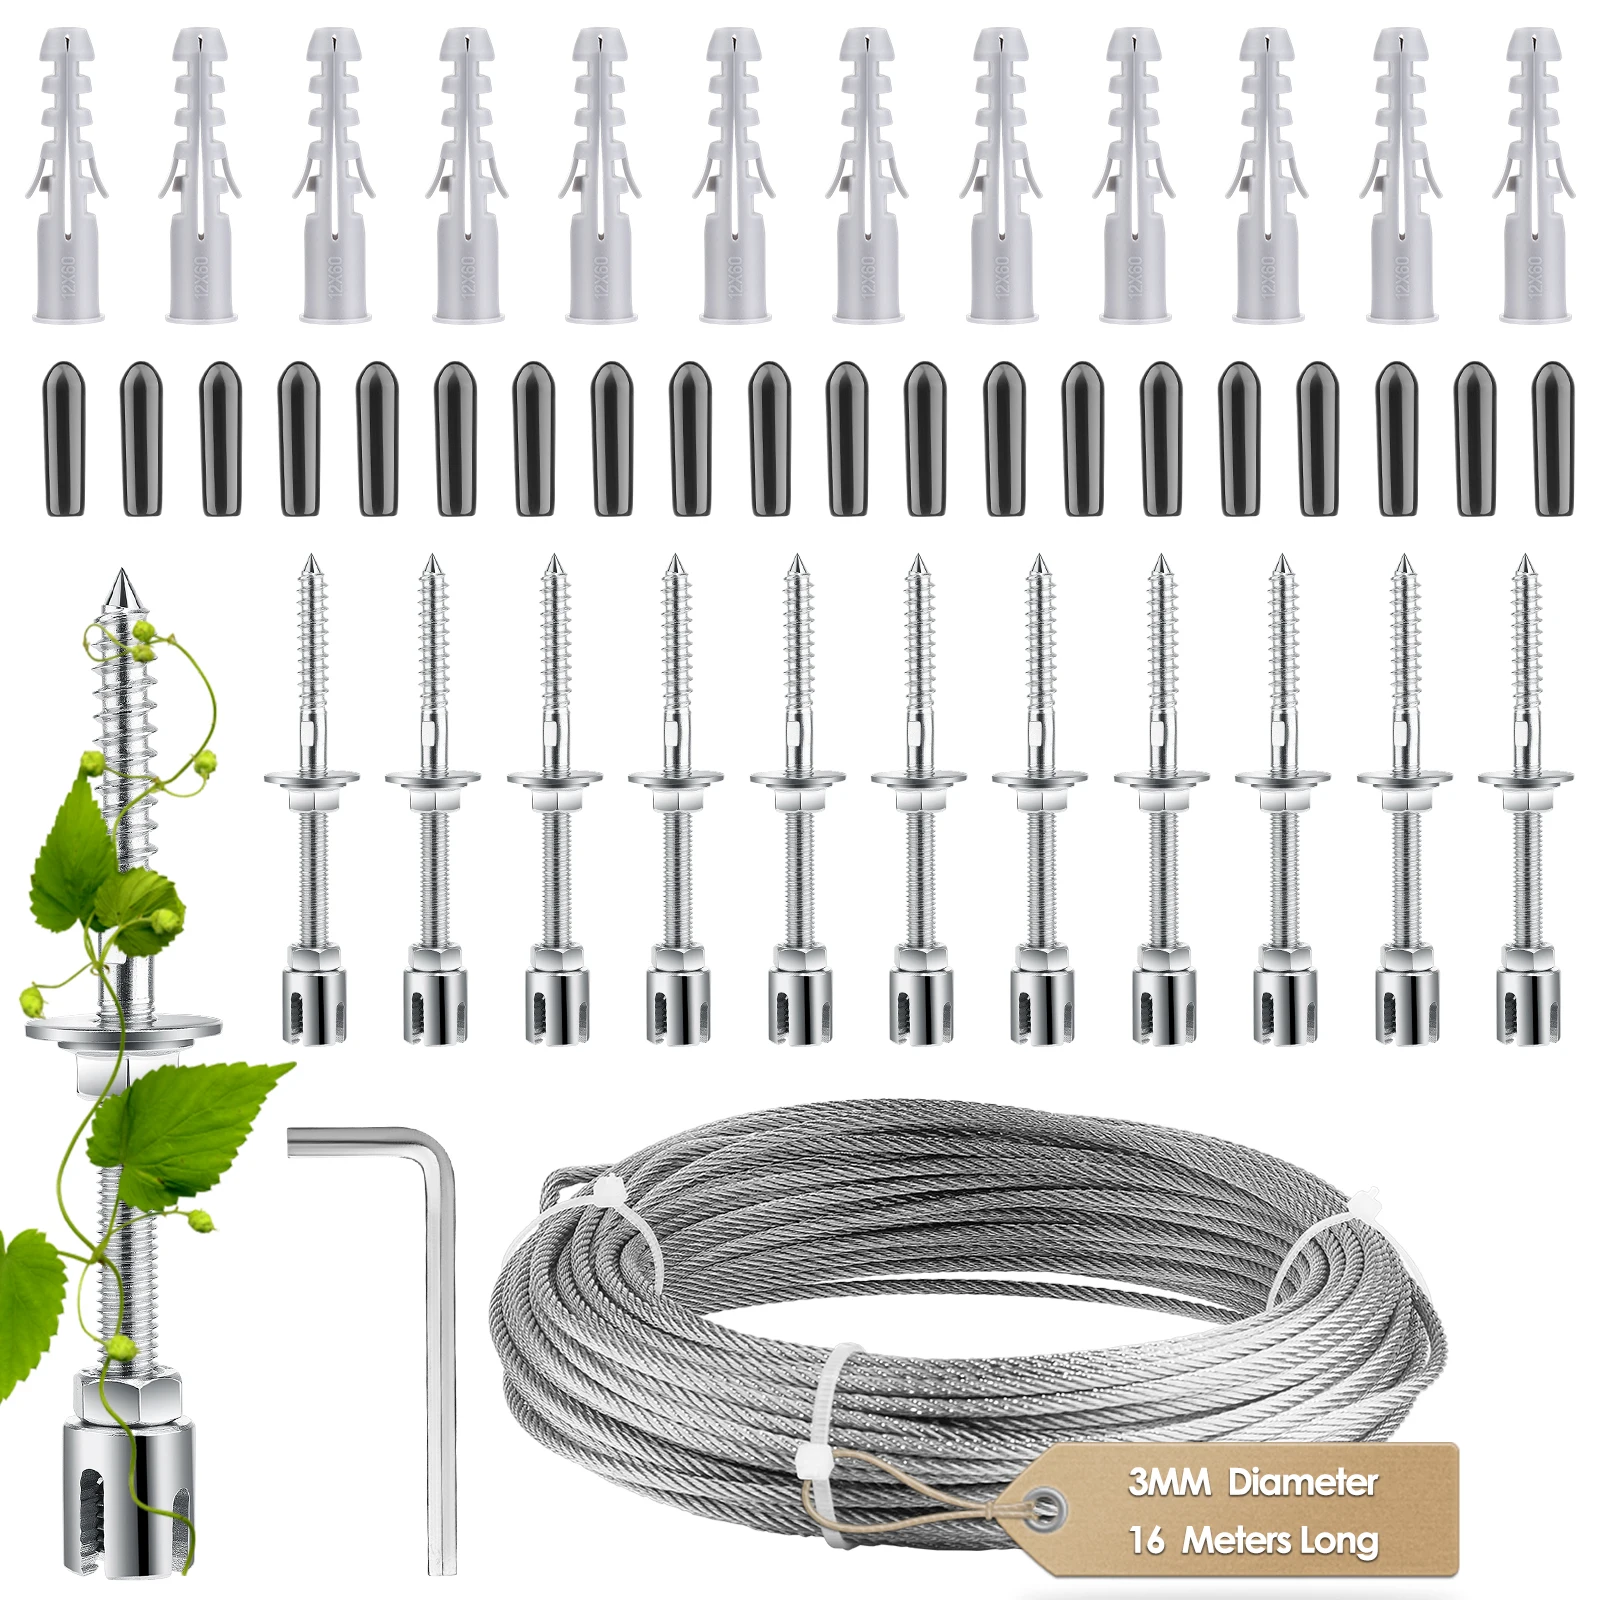 10 Sets Wire Trellis For Climbing Plant Outdoor Stainless Steel Fastener Green Wall Trellis Cross Clamp Cable Trellis System Kit